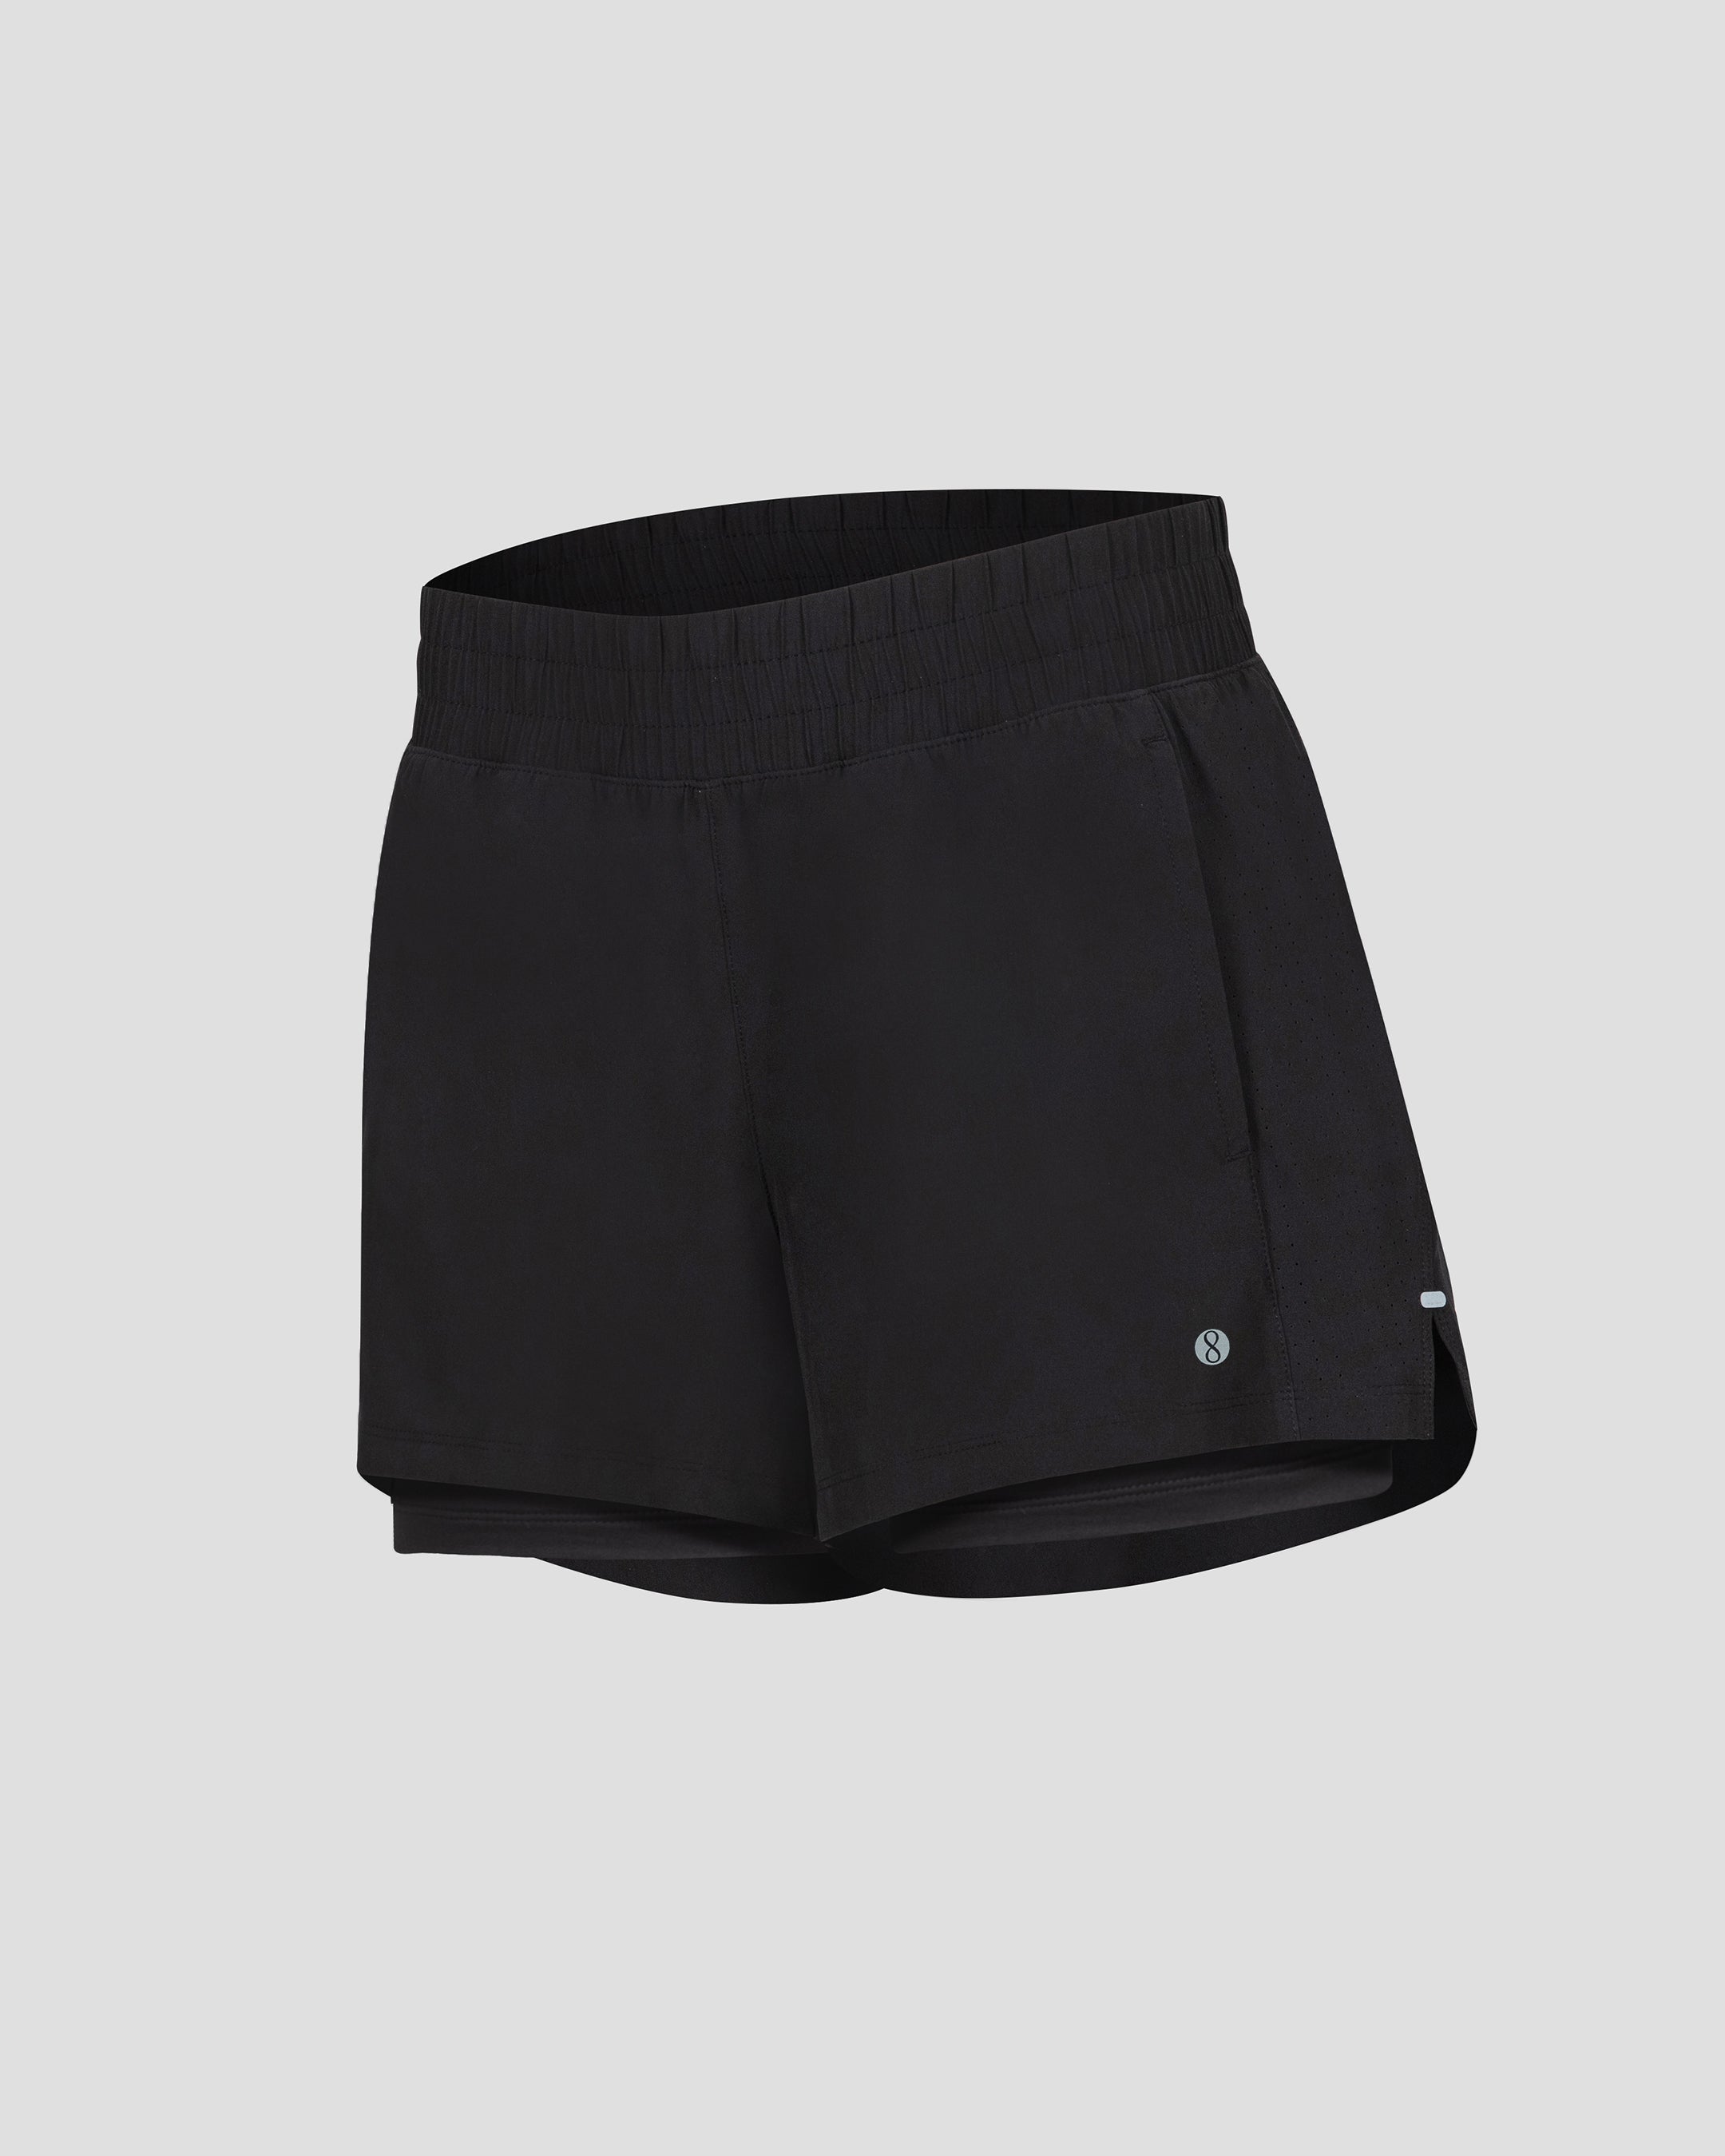 8 pairs of running shorts that actually have pockets